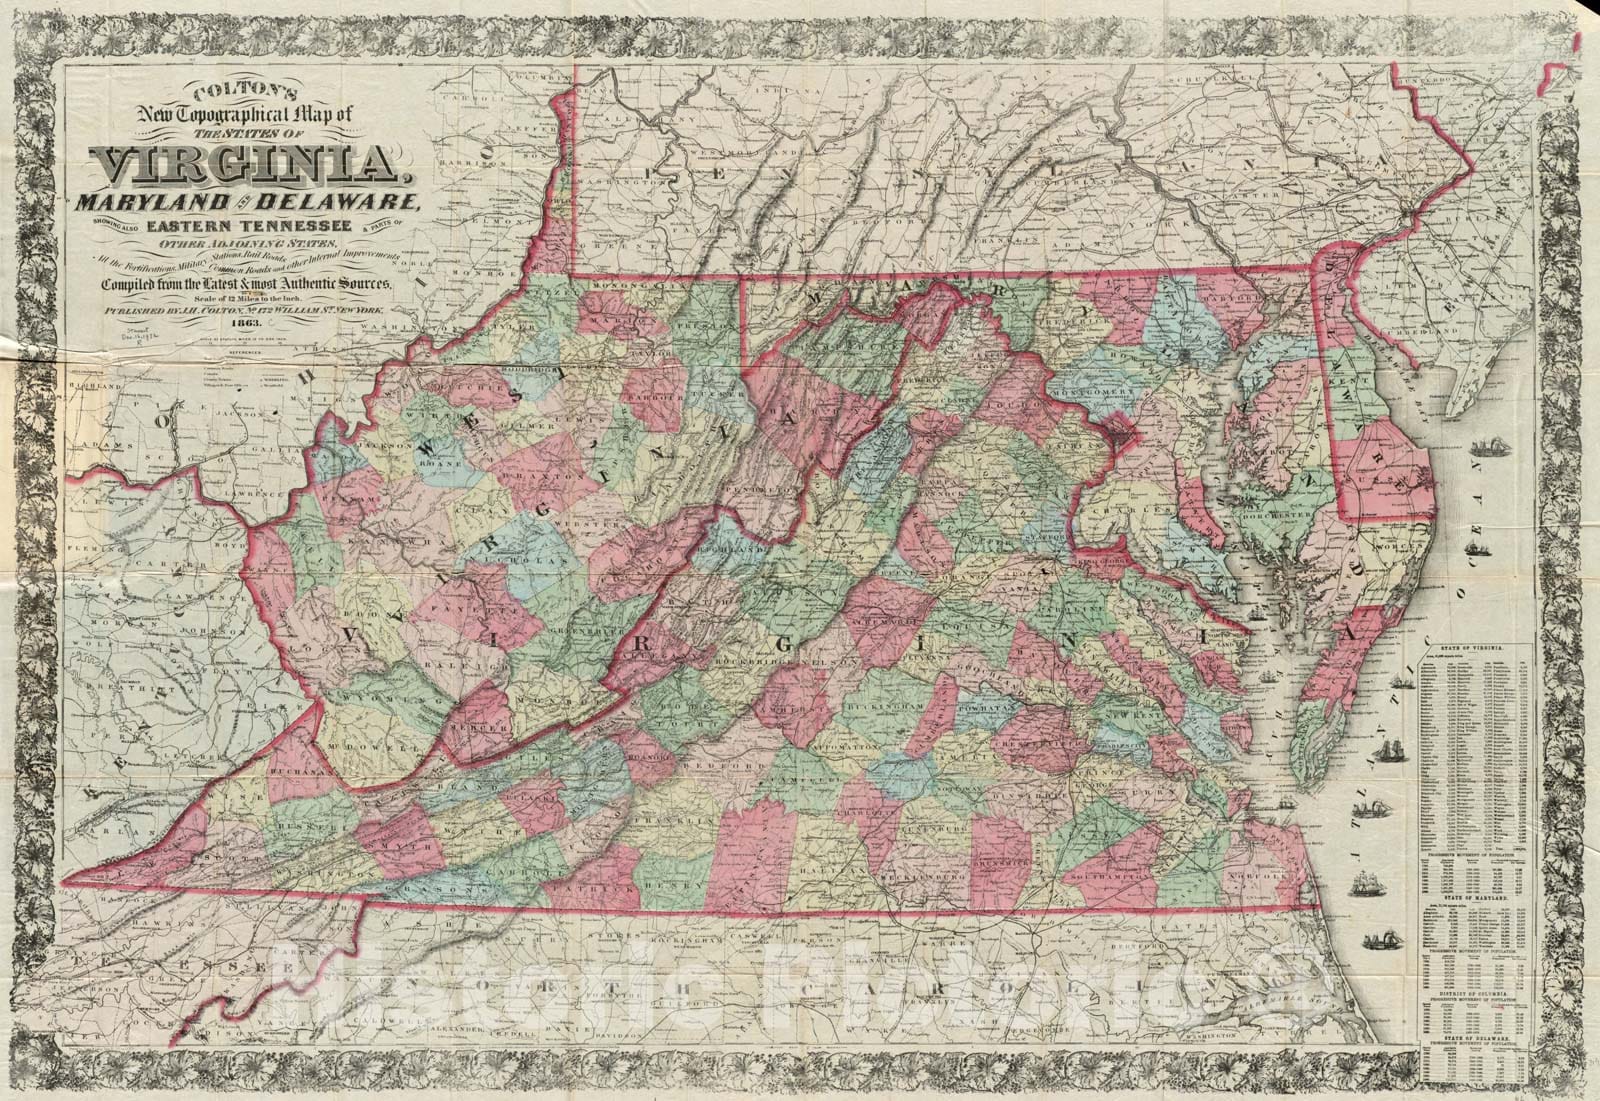 Historical Map, 1863 Colton's New Topographical map of The States of Virginia, Maryland & Delaware, Showing Also Eastern Tennessee & Parts of Other adjoining States, Vintage Wall Art